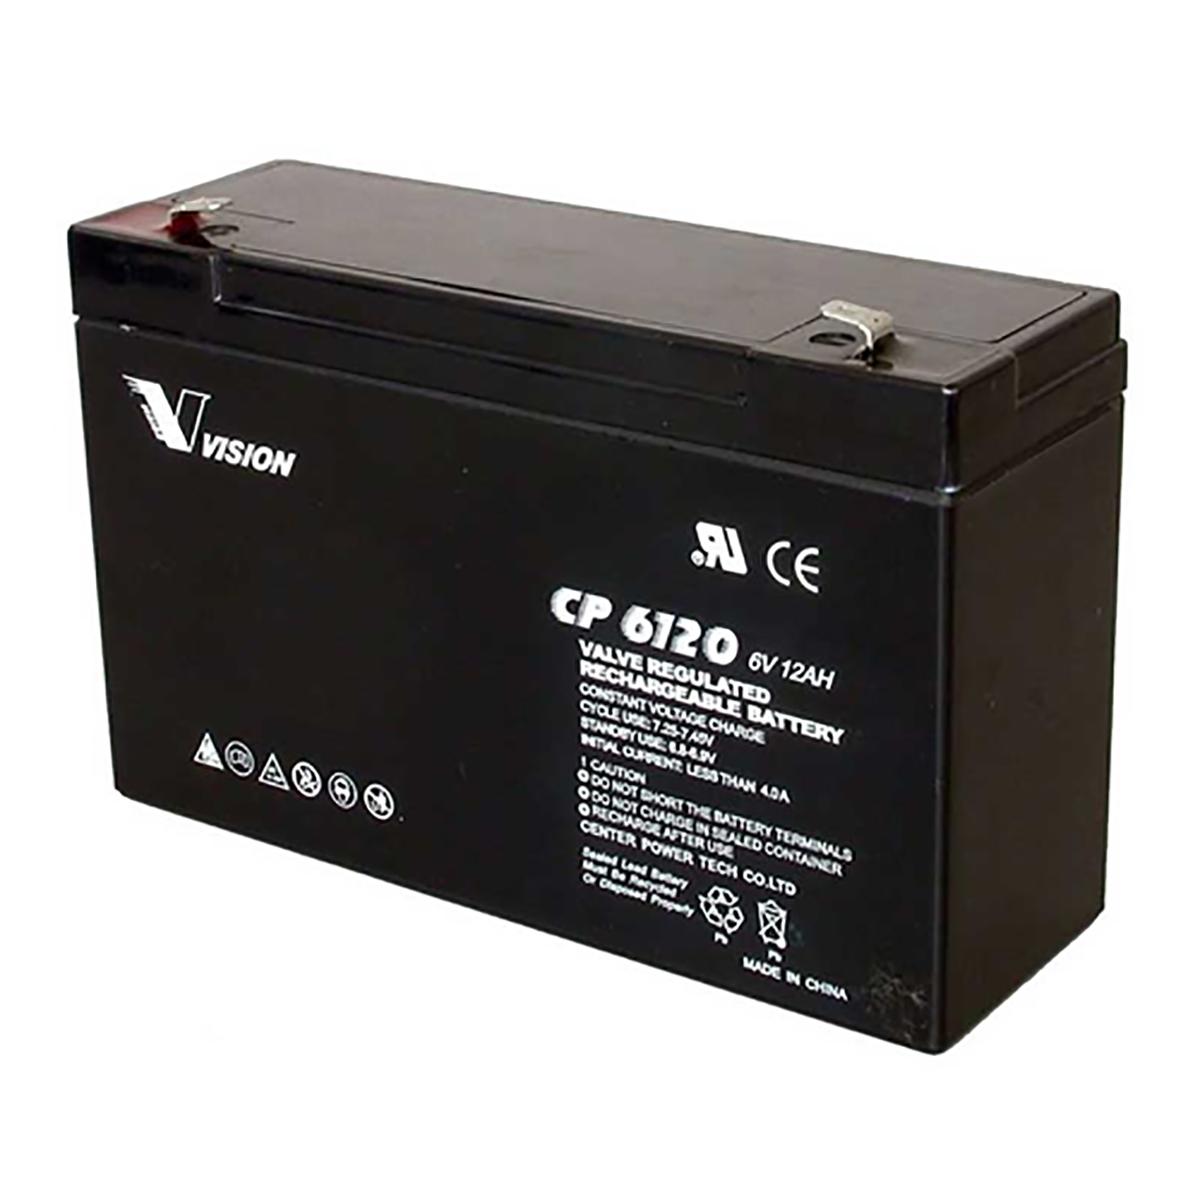 Vision CP6120 Battery 6V 12Ah Sealed Rechargeable